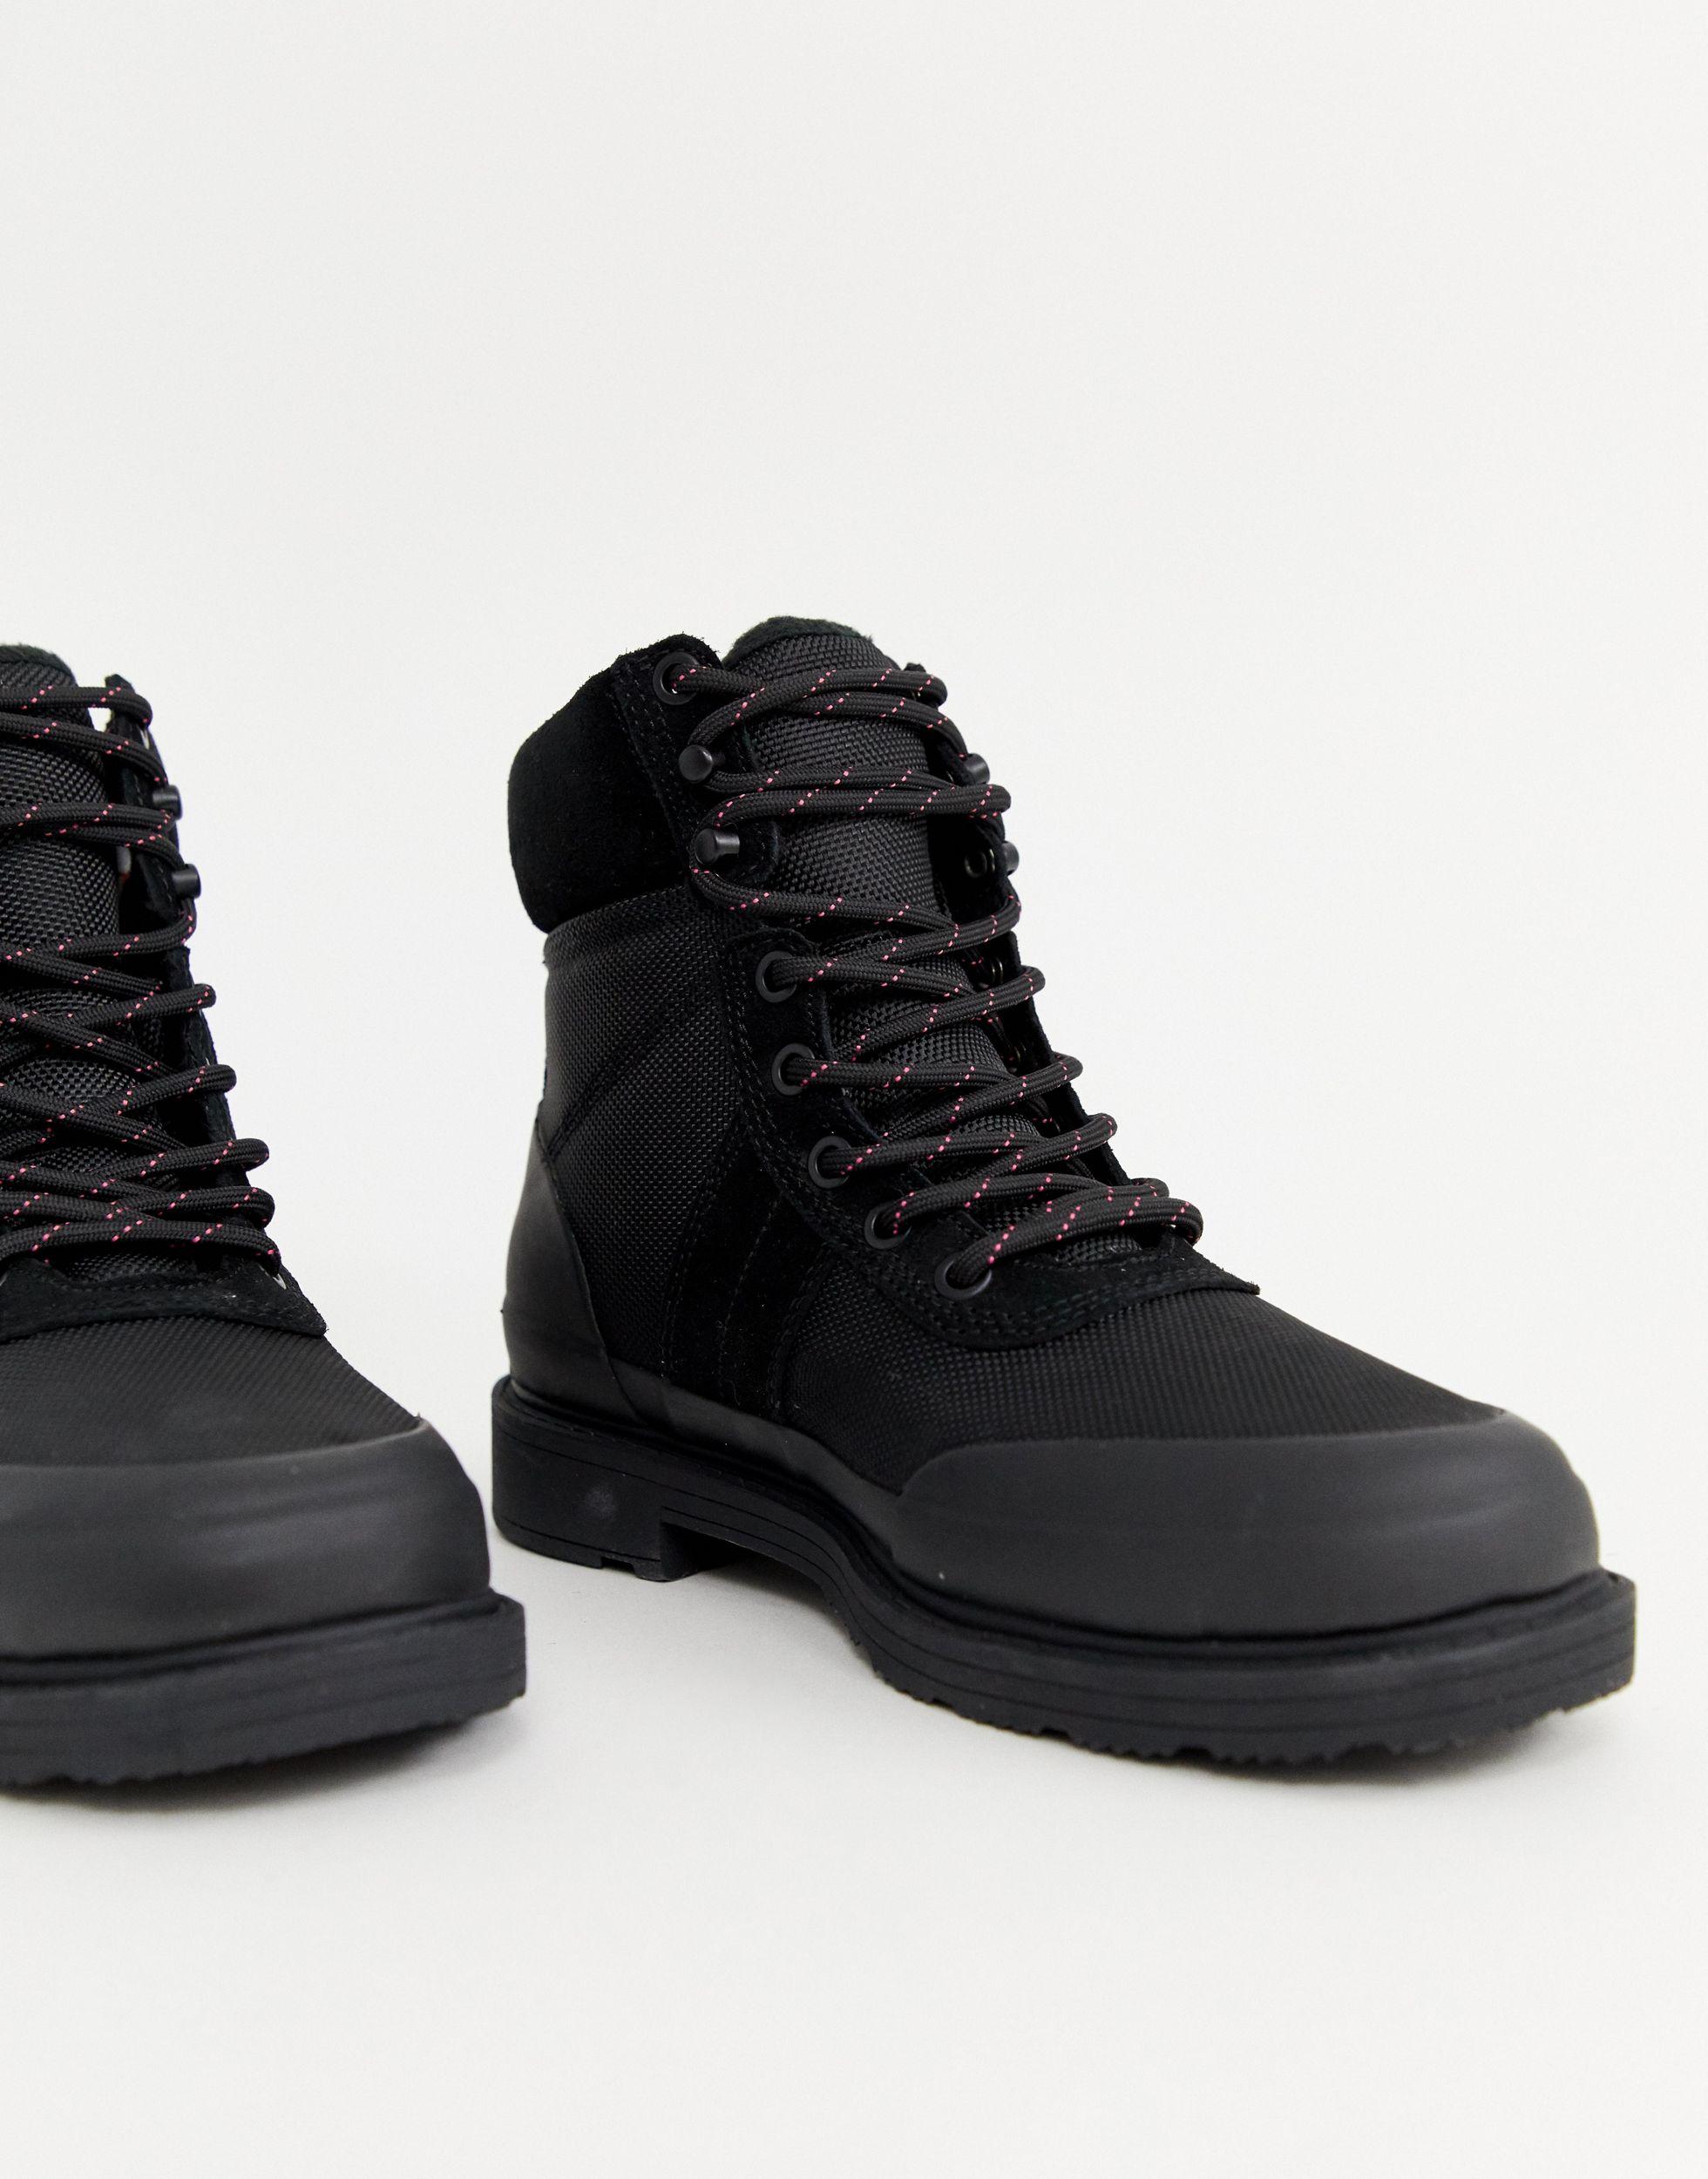 HUNTER Insulated Black Leather Hiker Boots - Lyst